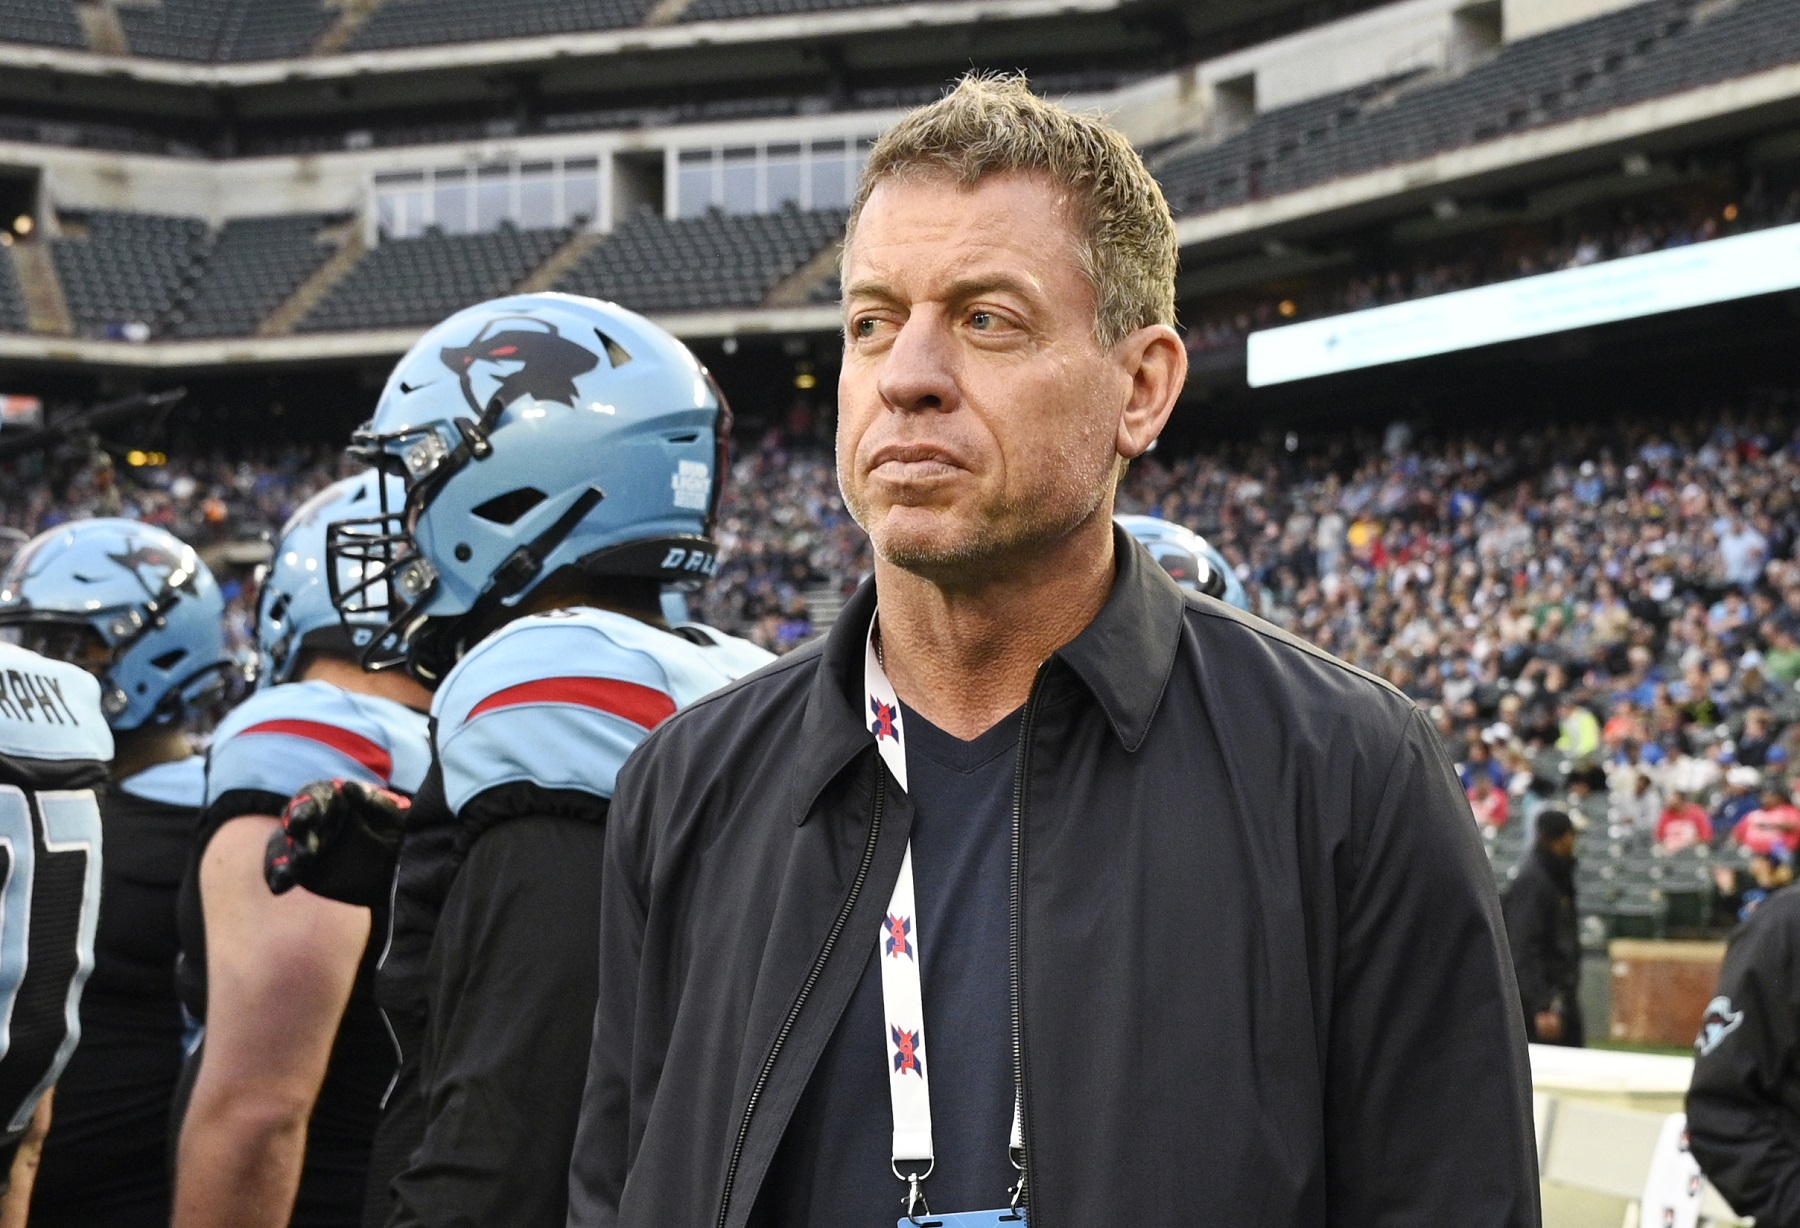 Troy Aikman Thinks Jerry Jones Should Pay Attention to Dwayne Haskins